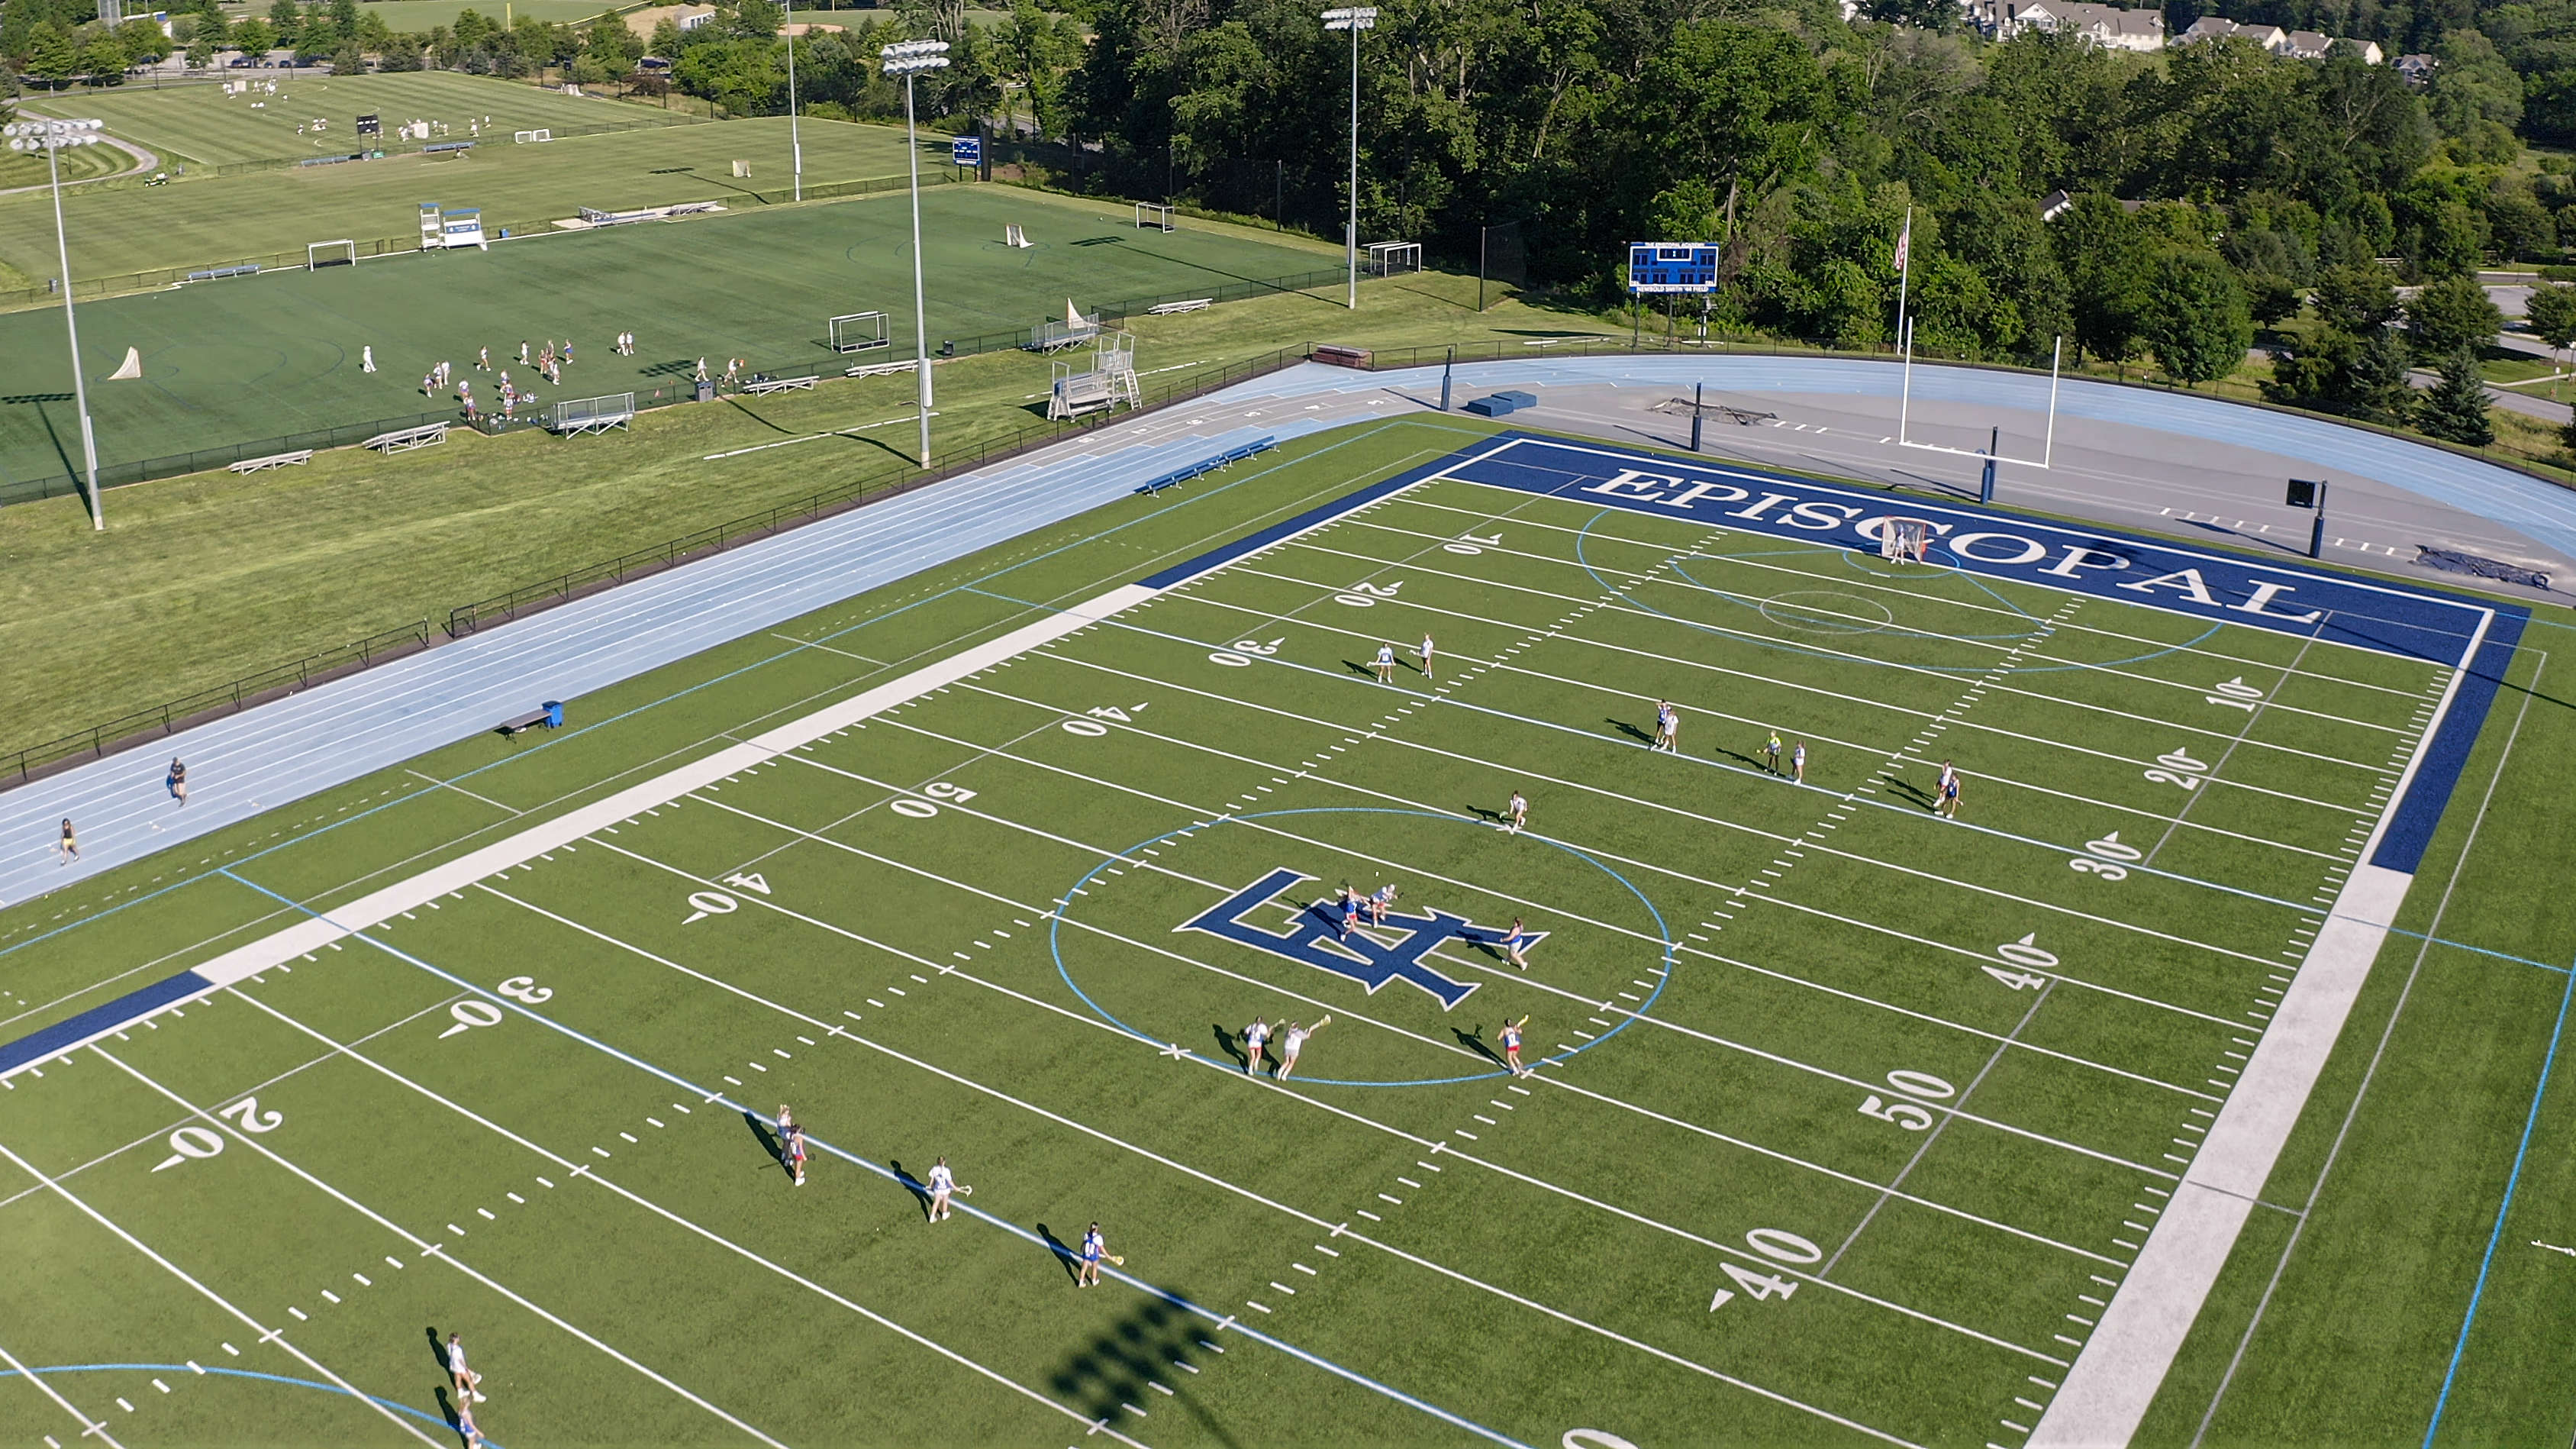 Drone video of sports playing fields, high school